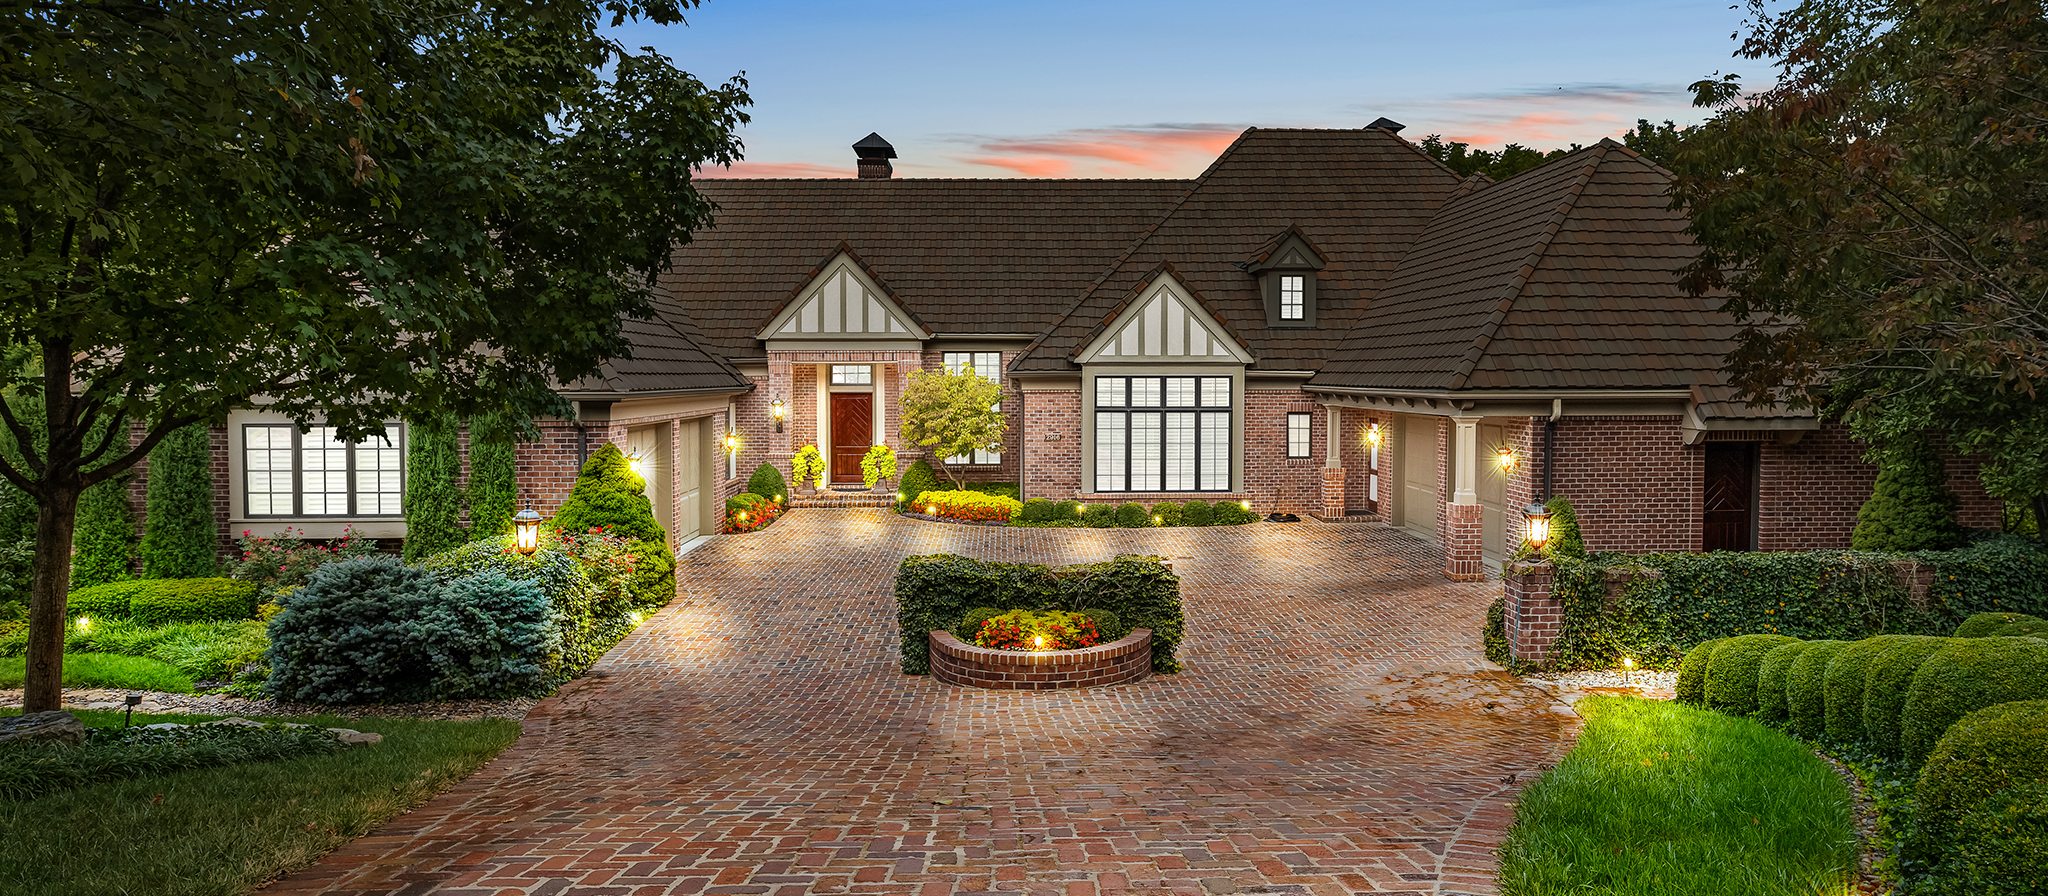 Red brick home with brick driveway